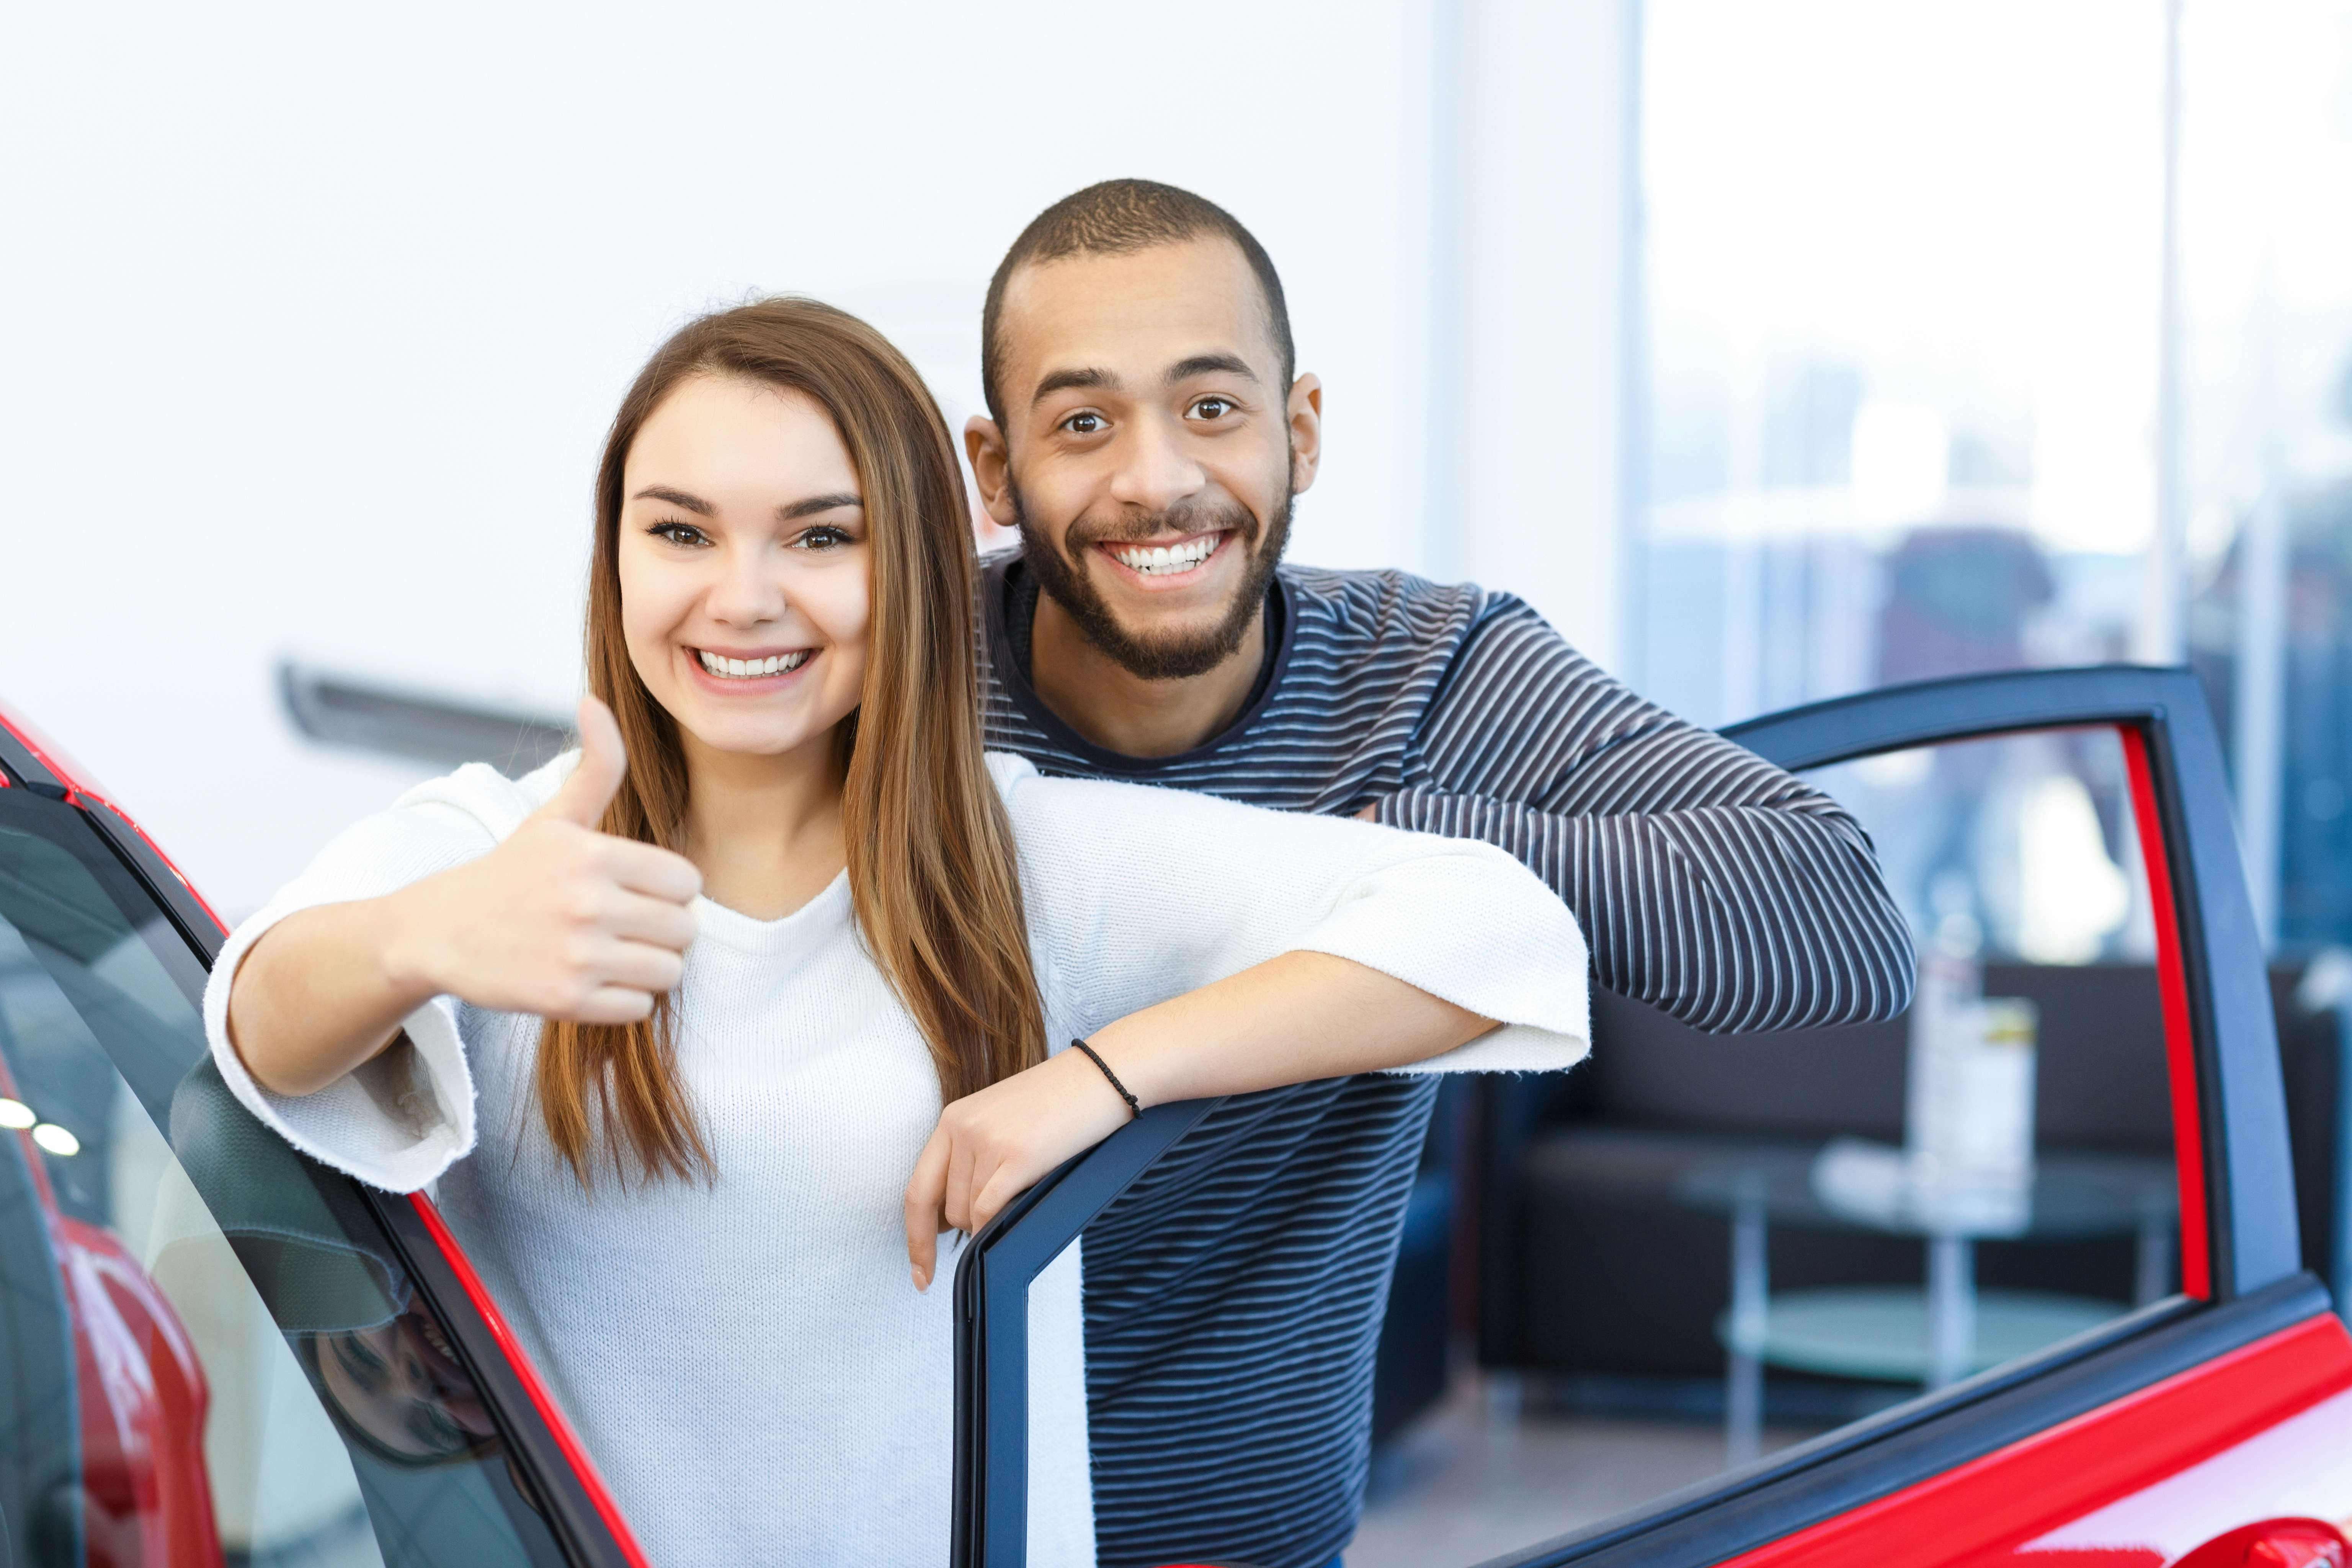 Couple checking out a new car at the dealership looking into vehicle at the salon international interracial buying car relationship concept N